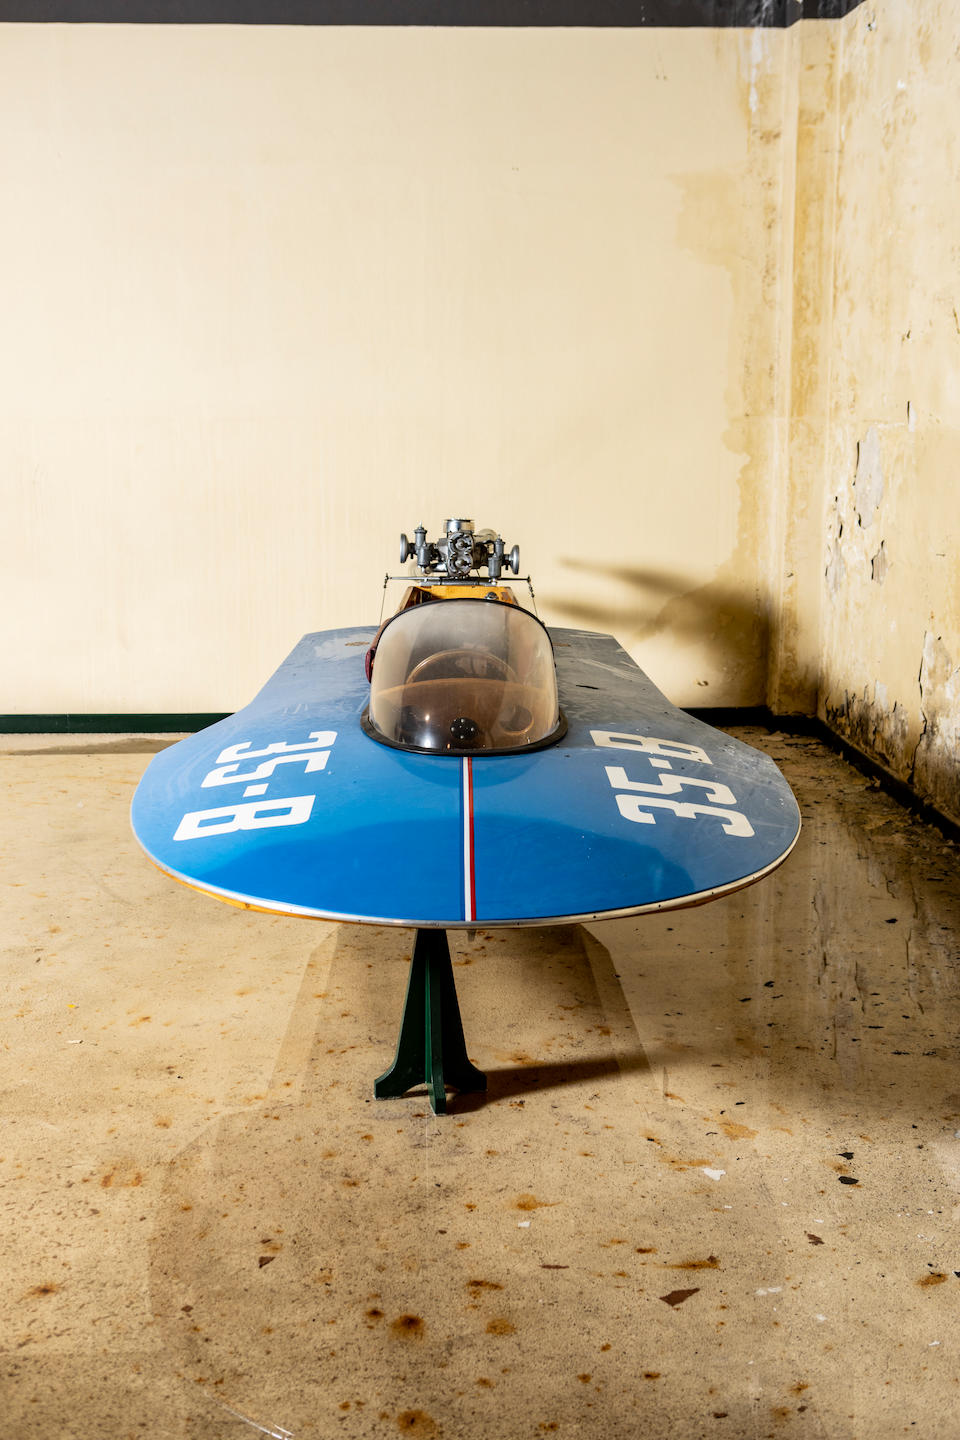 Offered from the Morbidelli Museum collection,c.1950s Racing Hydroplane